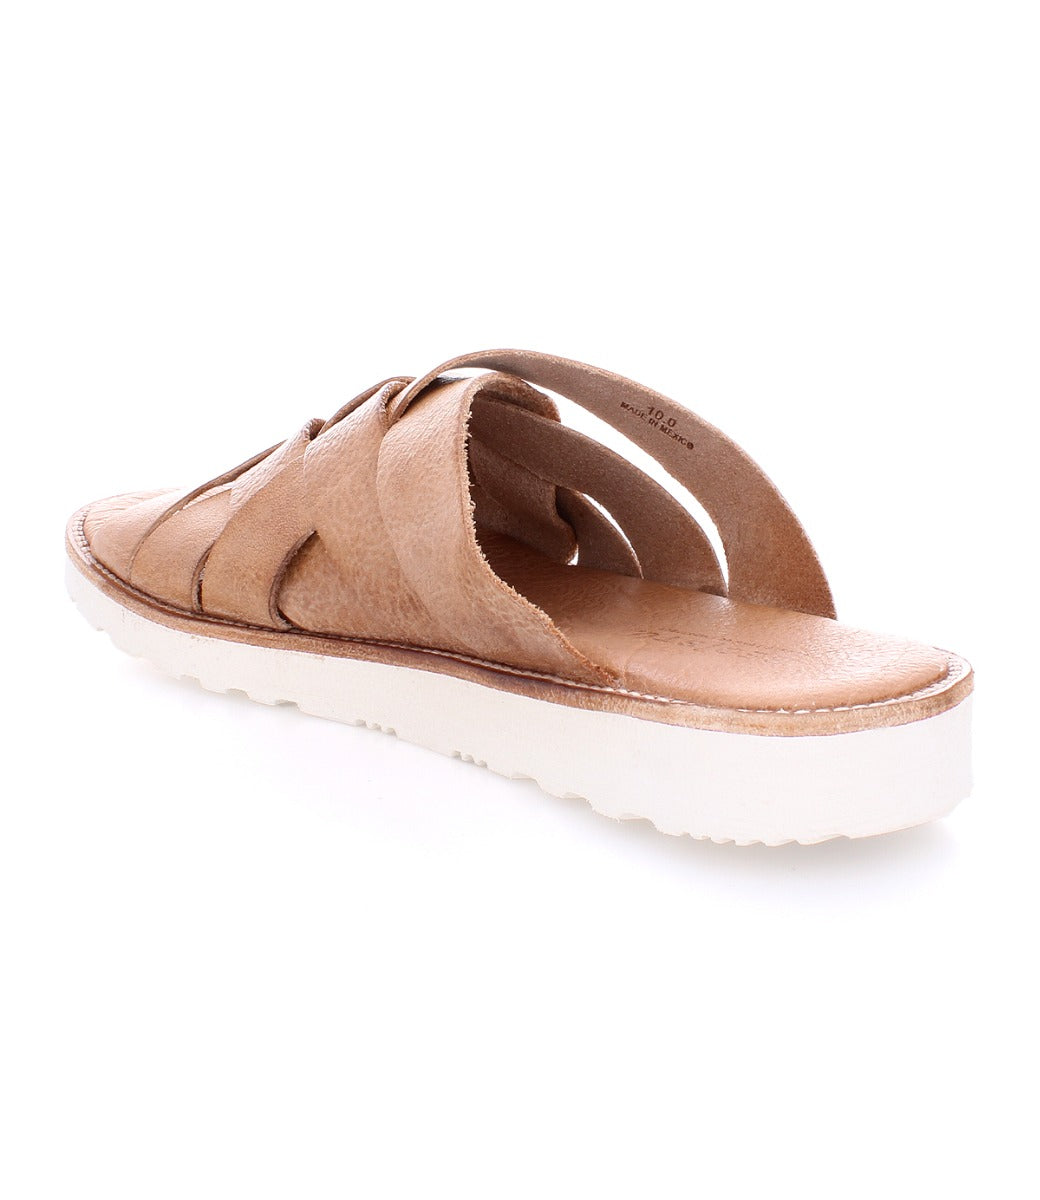 Abraham Light leather slide sandal with crisscross straps and a white platform sole, available in men's sizes, displayed on a white background by Bed Stu.